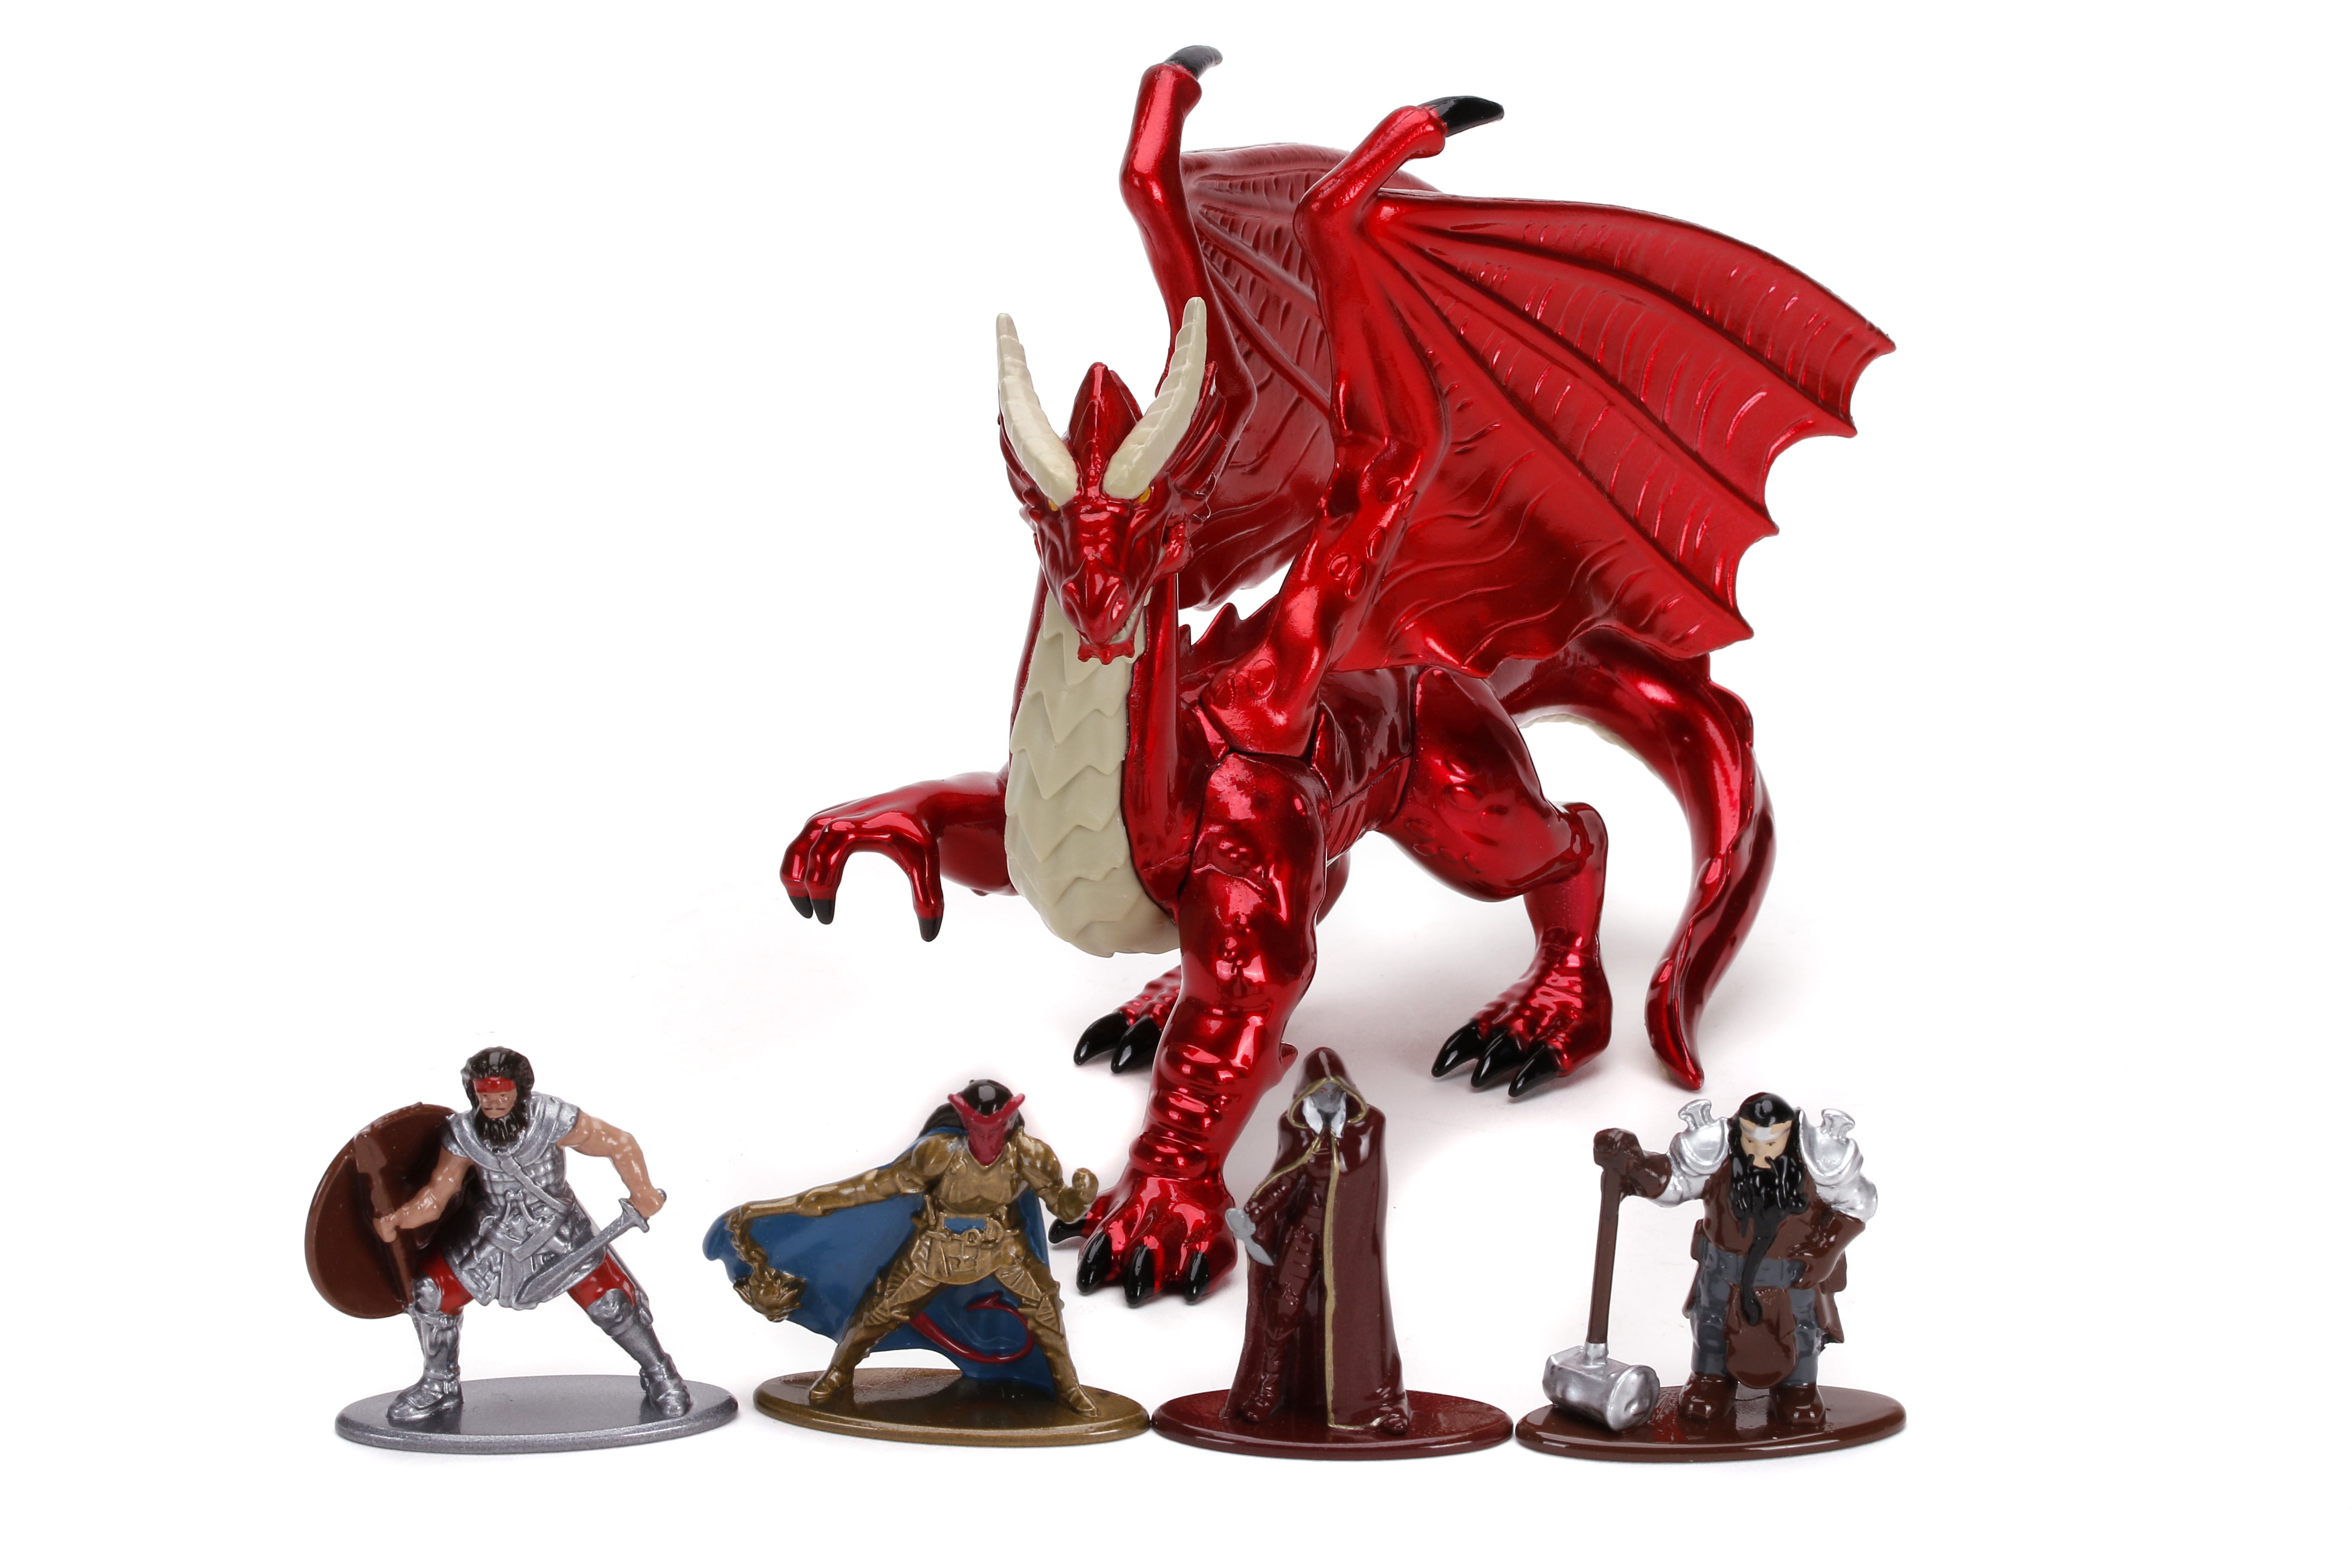 Lot 4 Pcs hero Figure From Dungeons & Dragon D&D Marvelous Miniatures Xmas Gift 